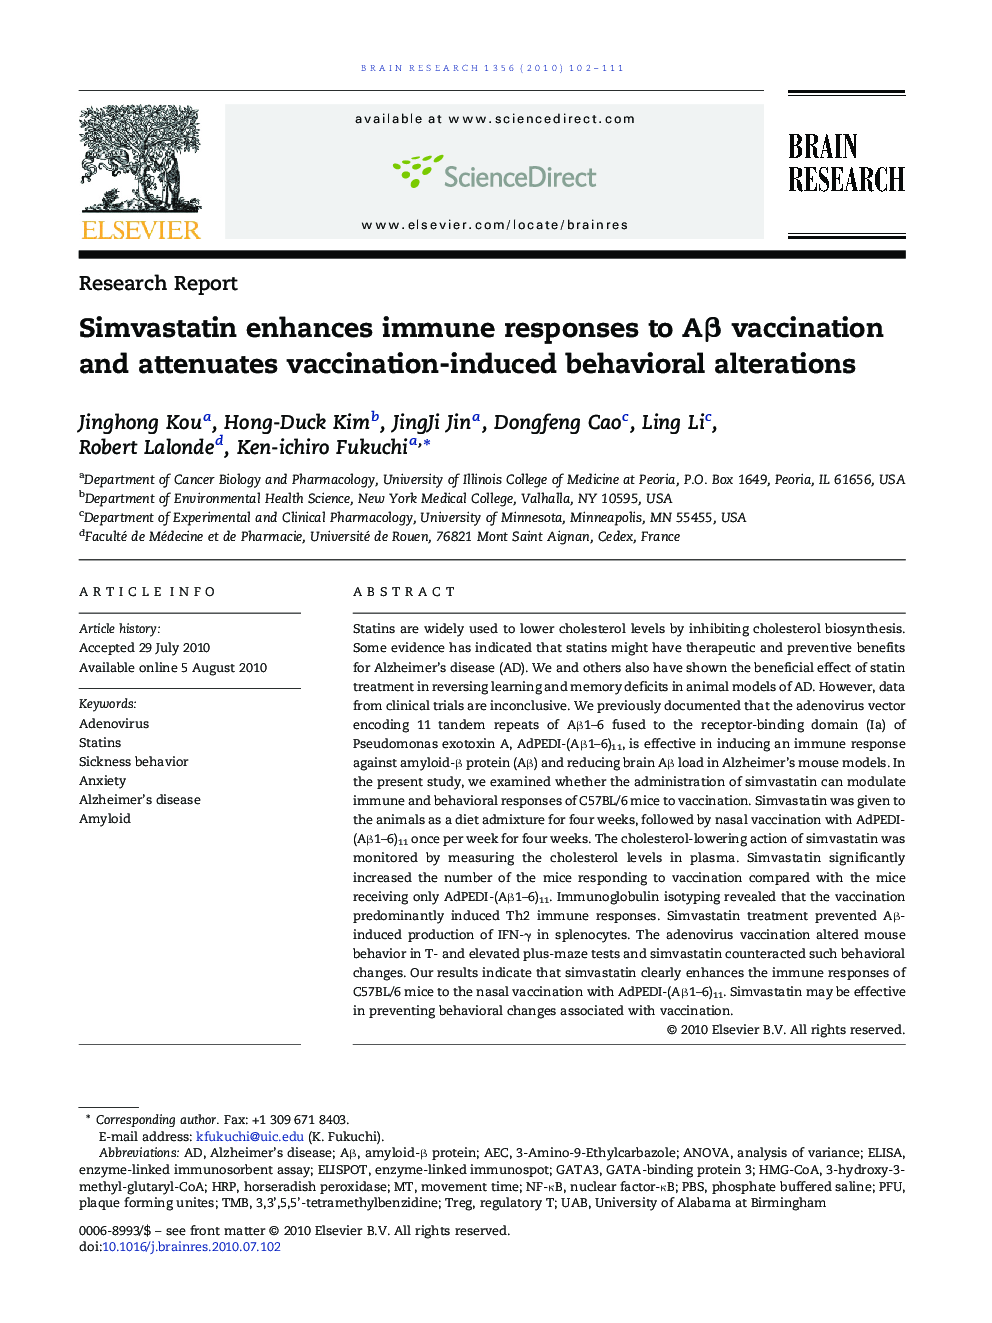 Simvastatin enhances immune responses to Aβ vaccination and attenuates vaccination-induced behavioral alterations